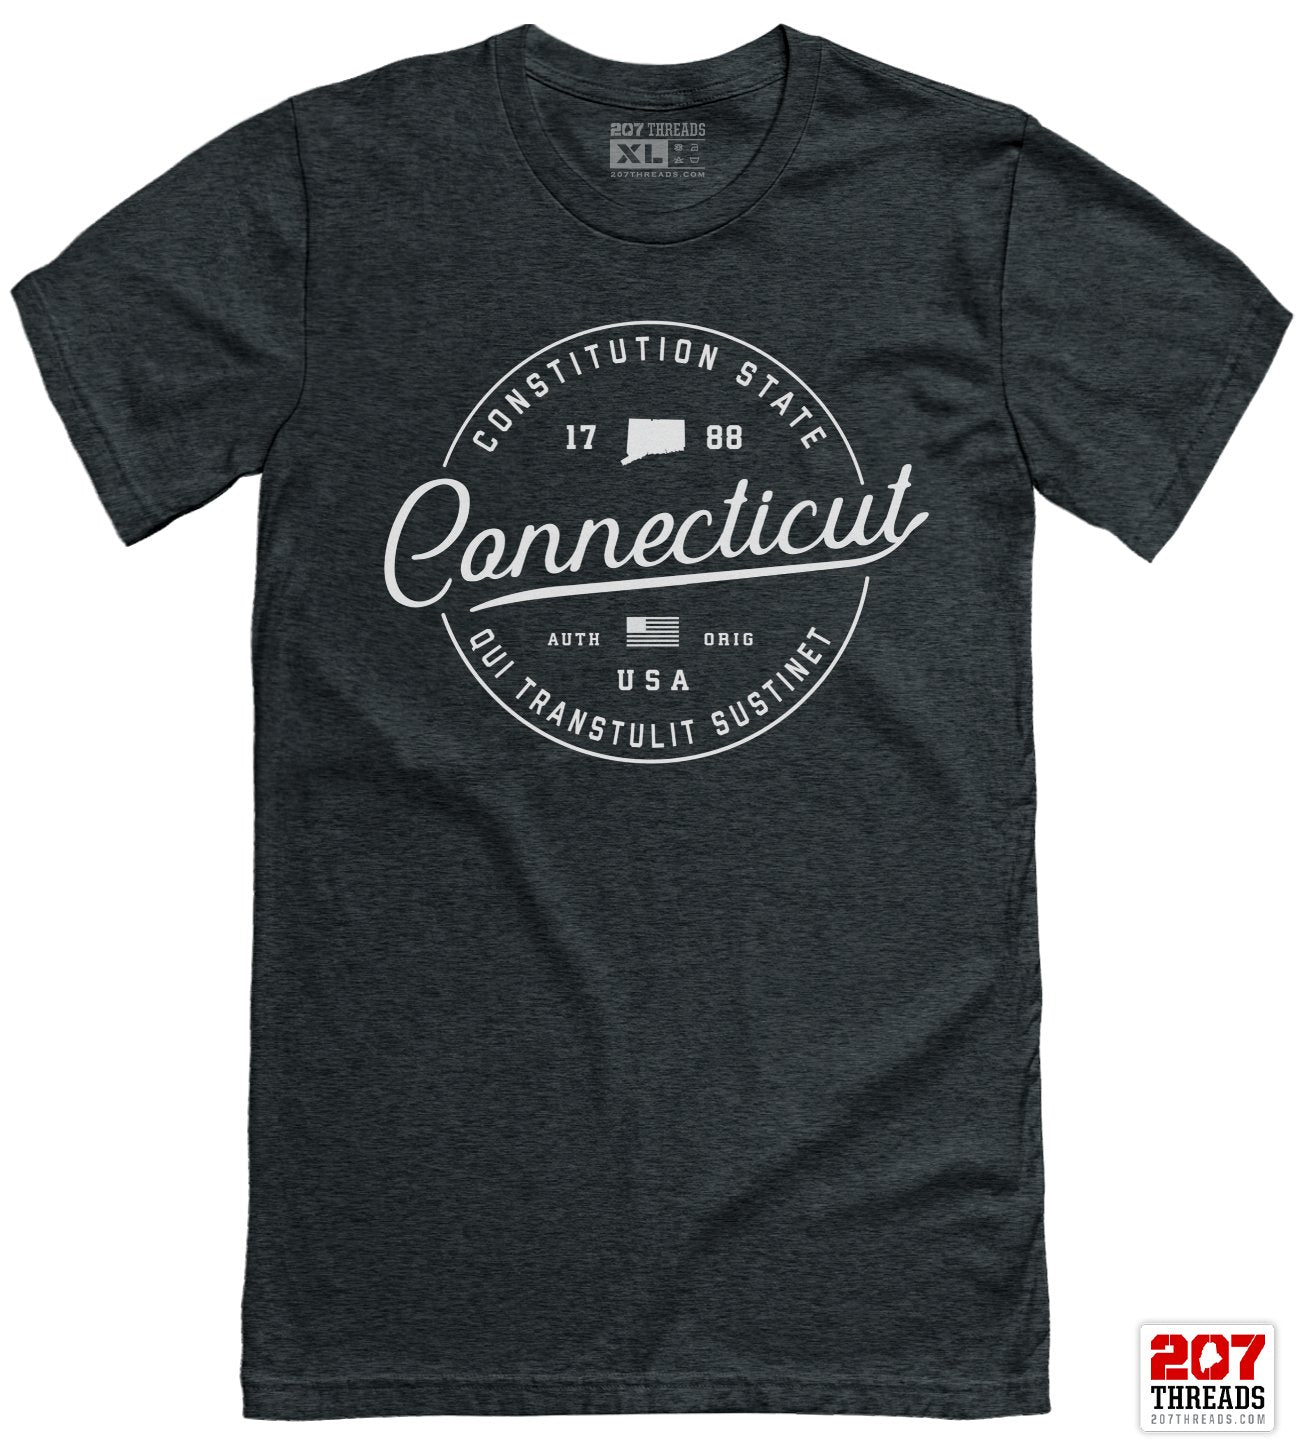 State of Connecticut T-Shirt - Soft Connecticut Tee